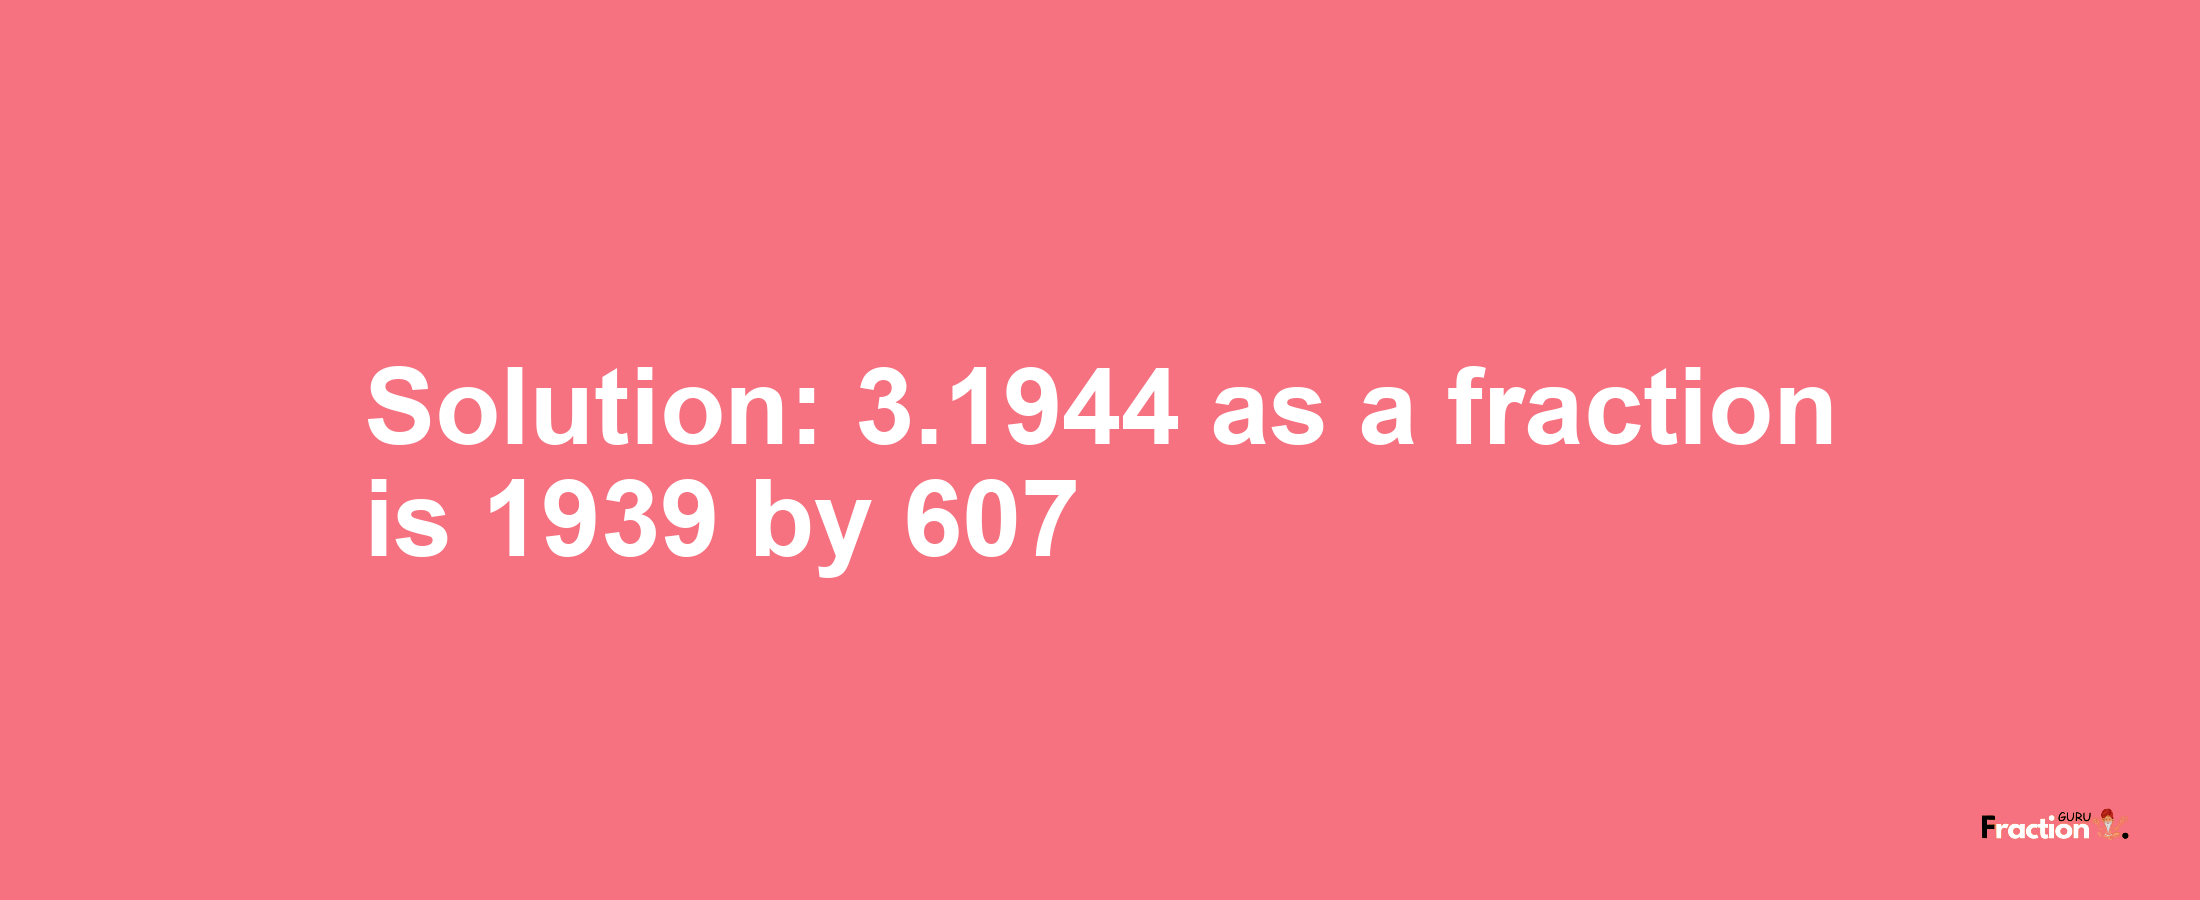 Solution:3.1944 as a fraction is 1939/607